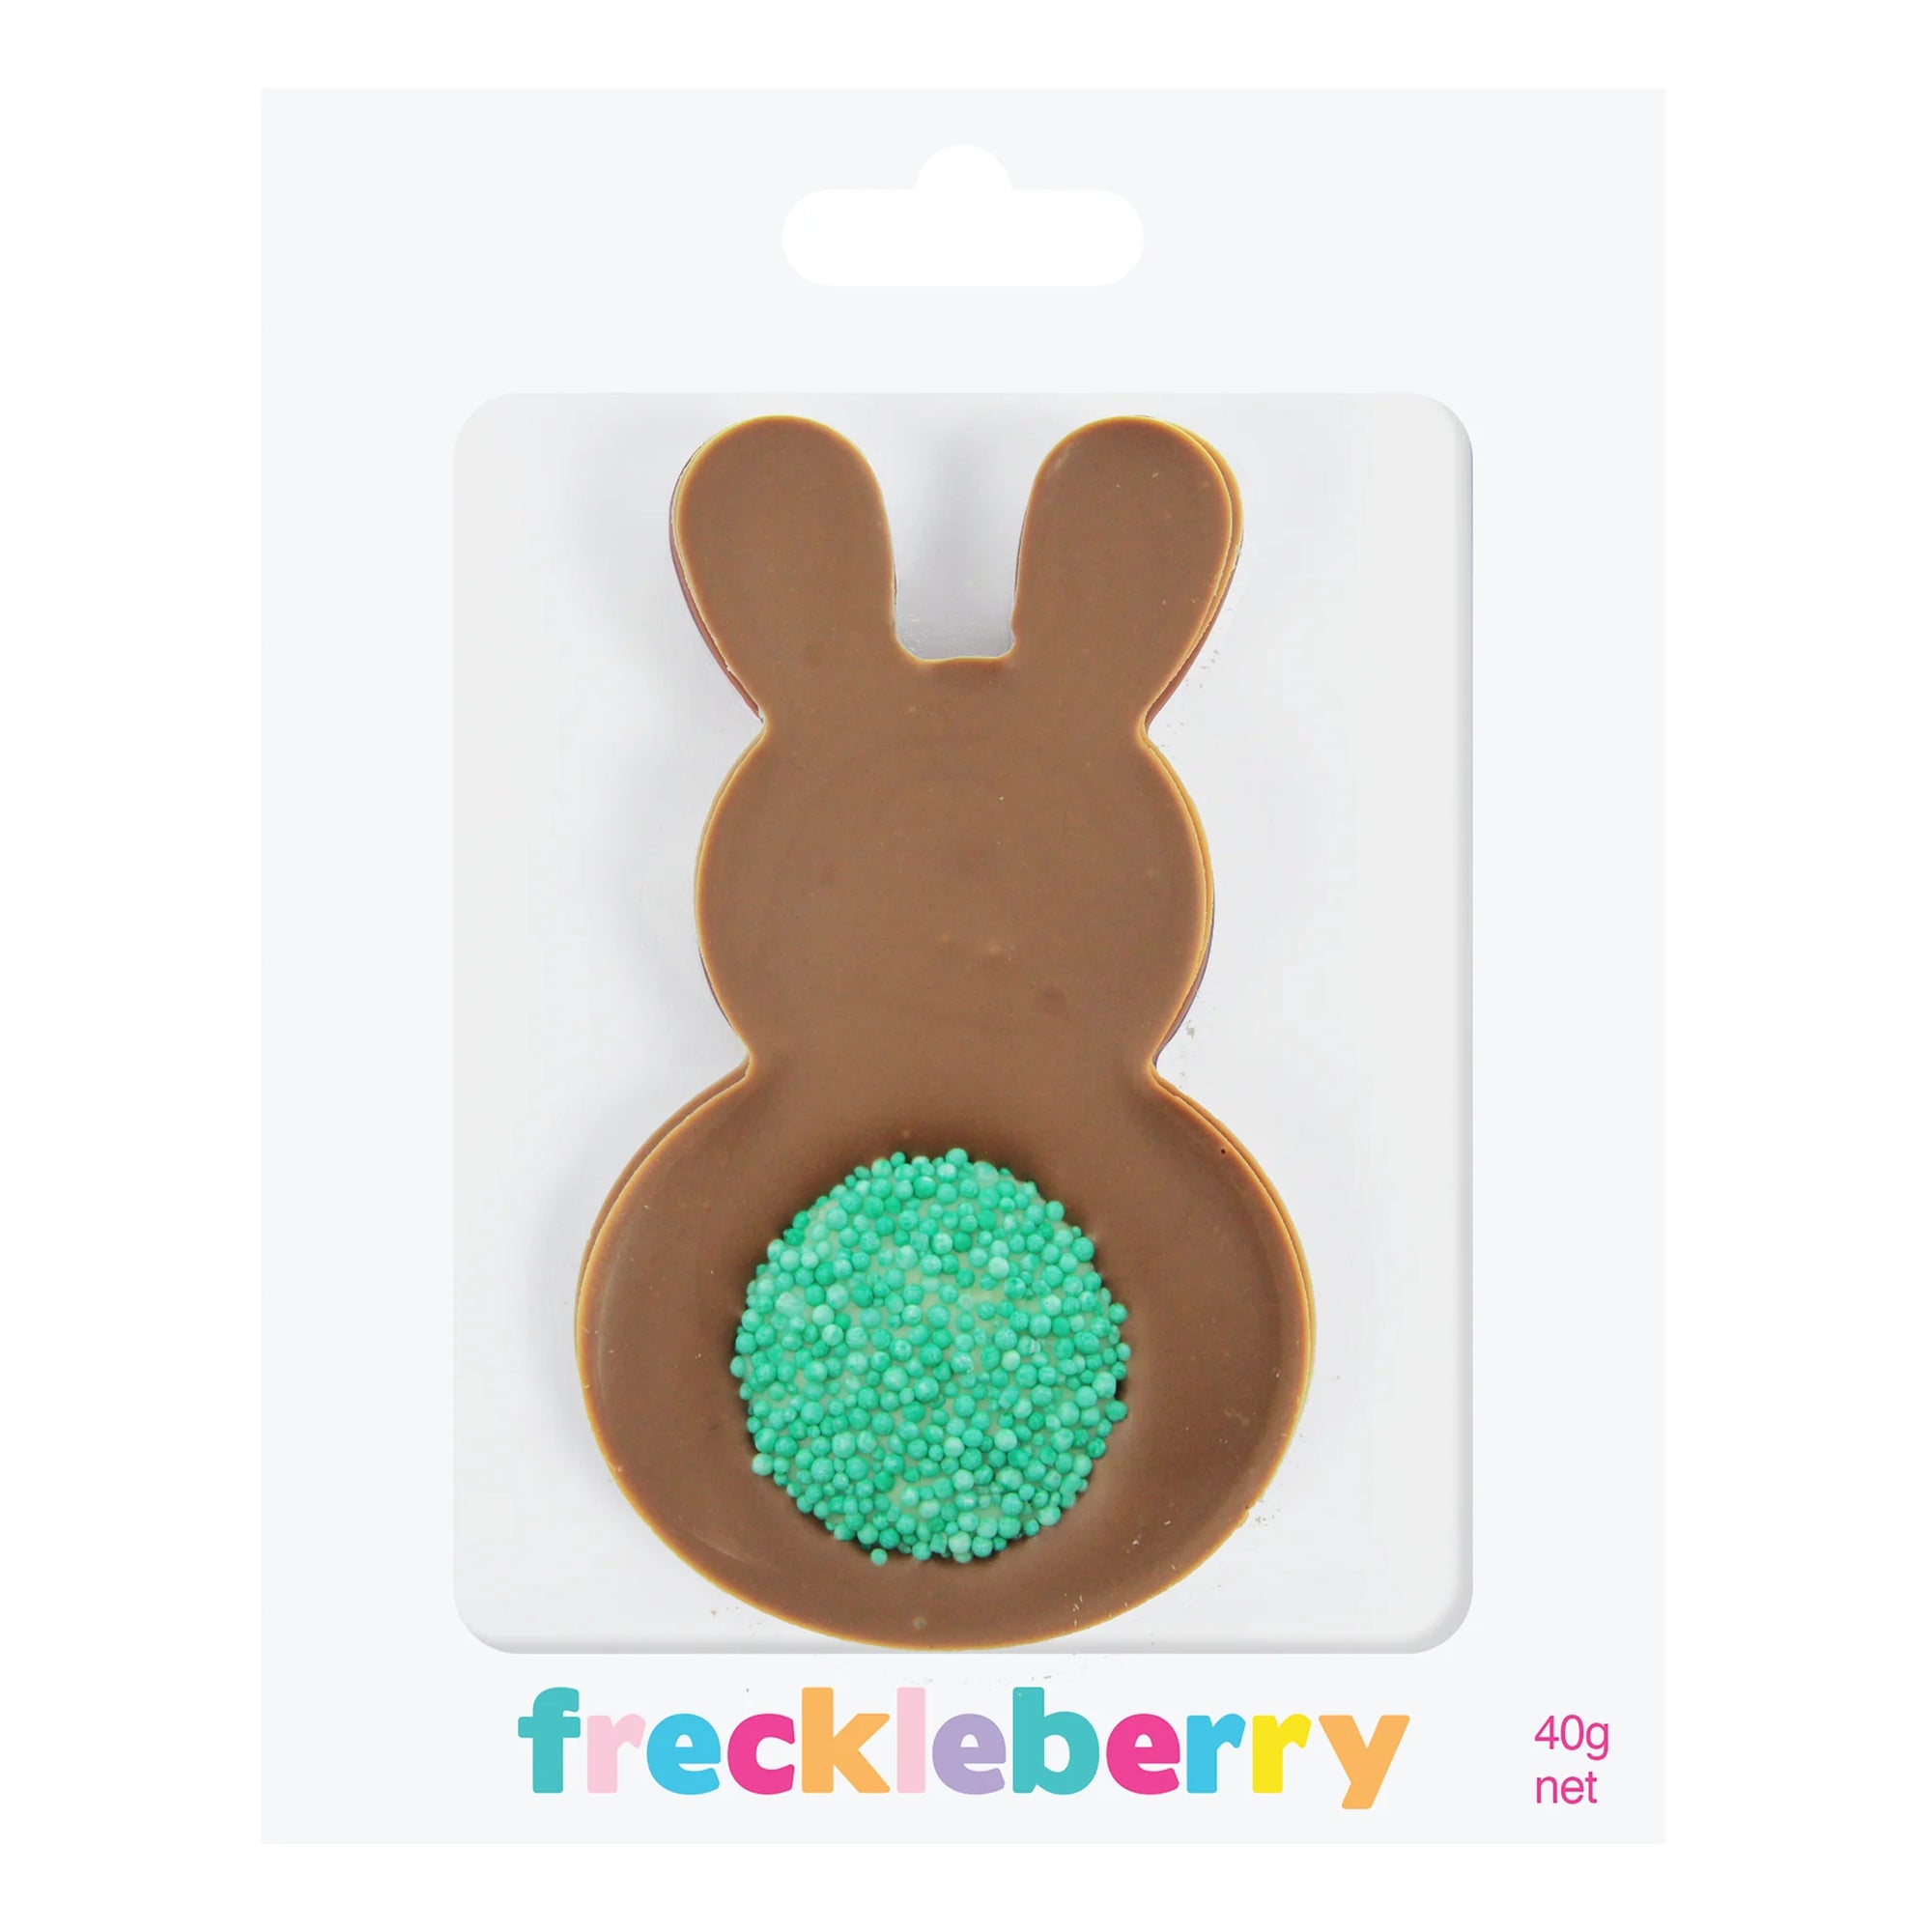 Chocolate Bunny with Green Freckle Tail